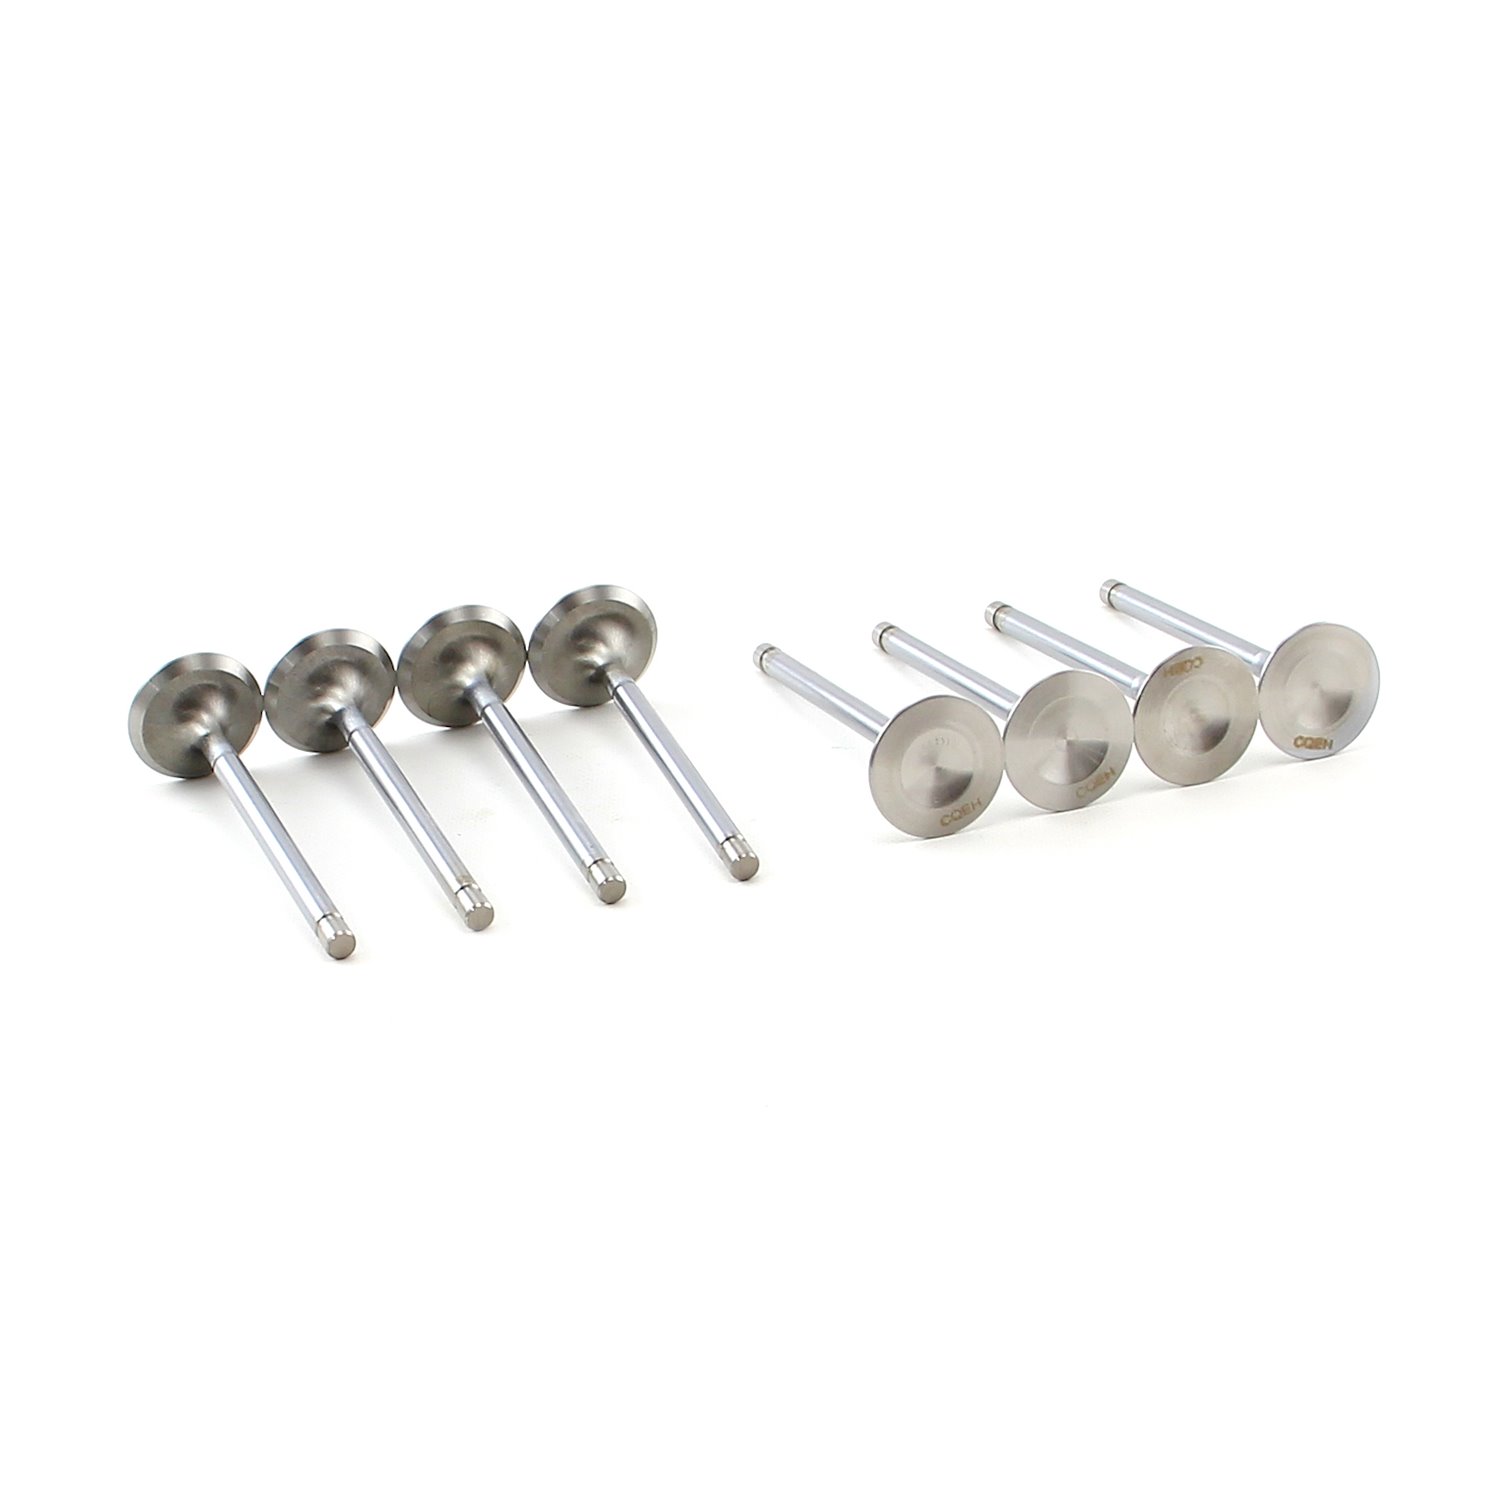 Chevy LS3 1.600 +Std 8mm Stainless Steel Exhaust Valves Set 8Pcs